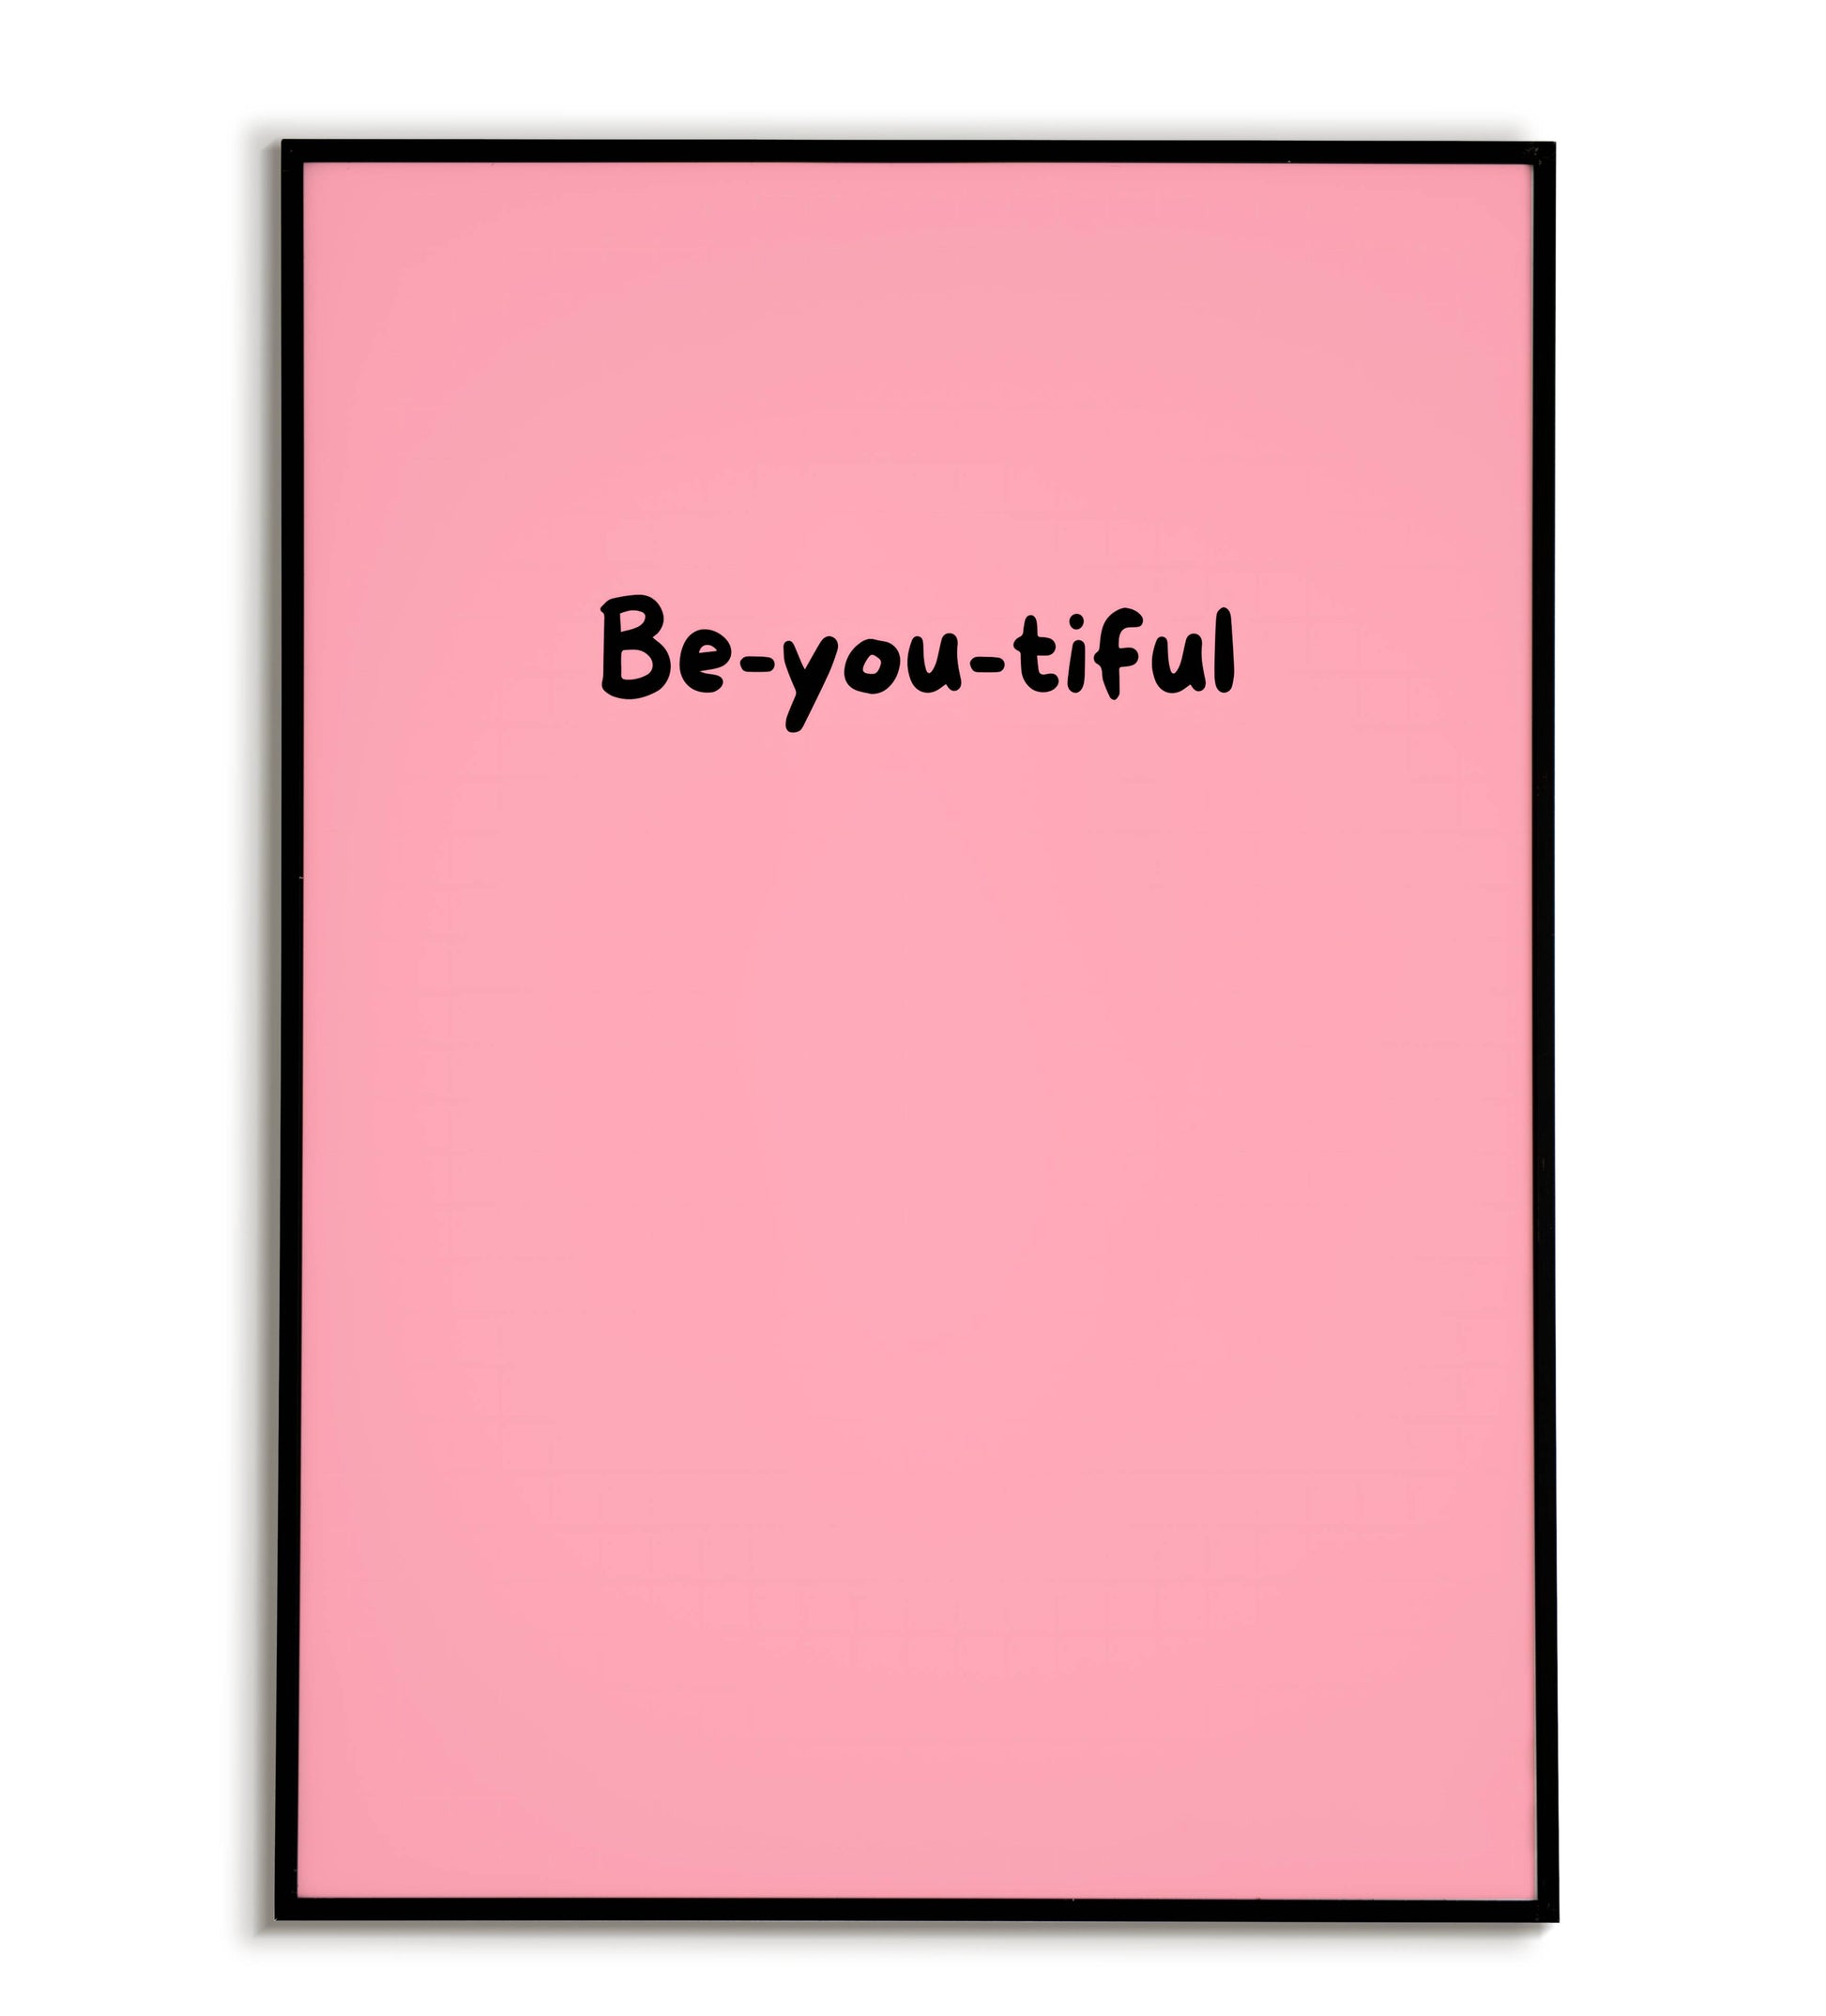 Empowering "Be-you-tiful" printable poster, celebrate self-love and individuality.	